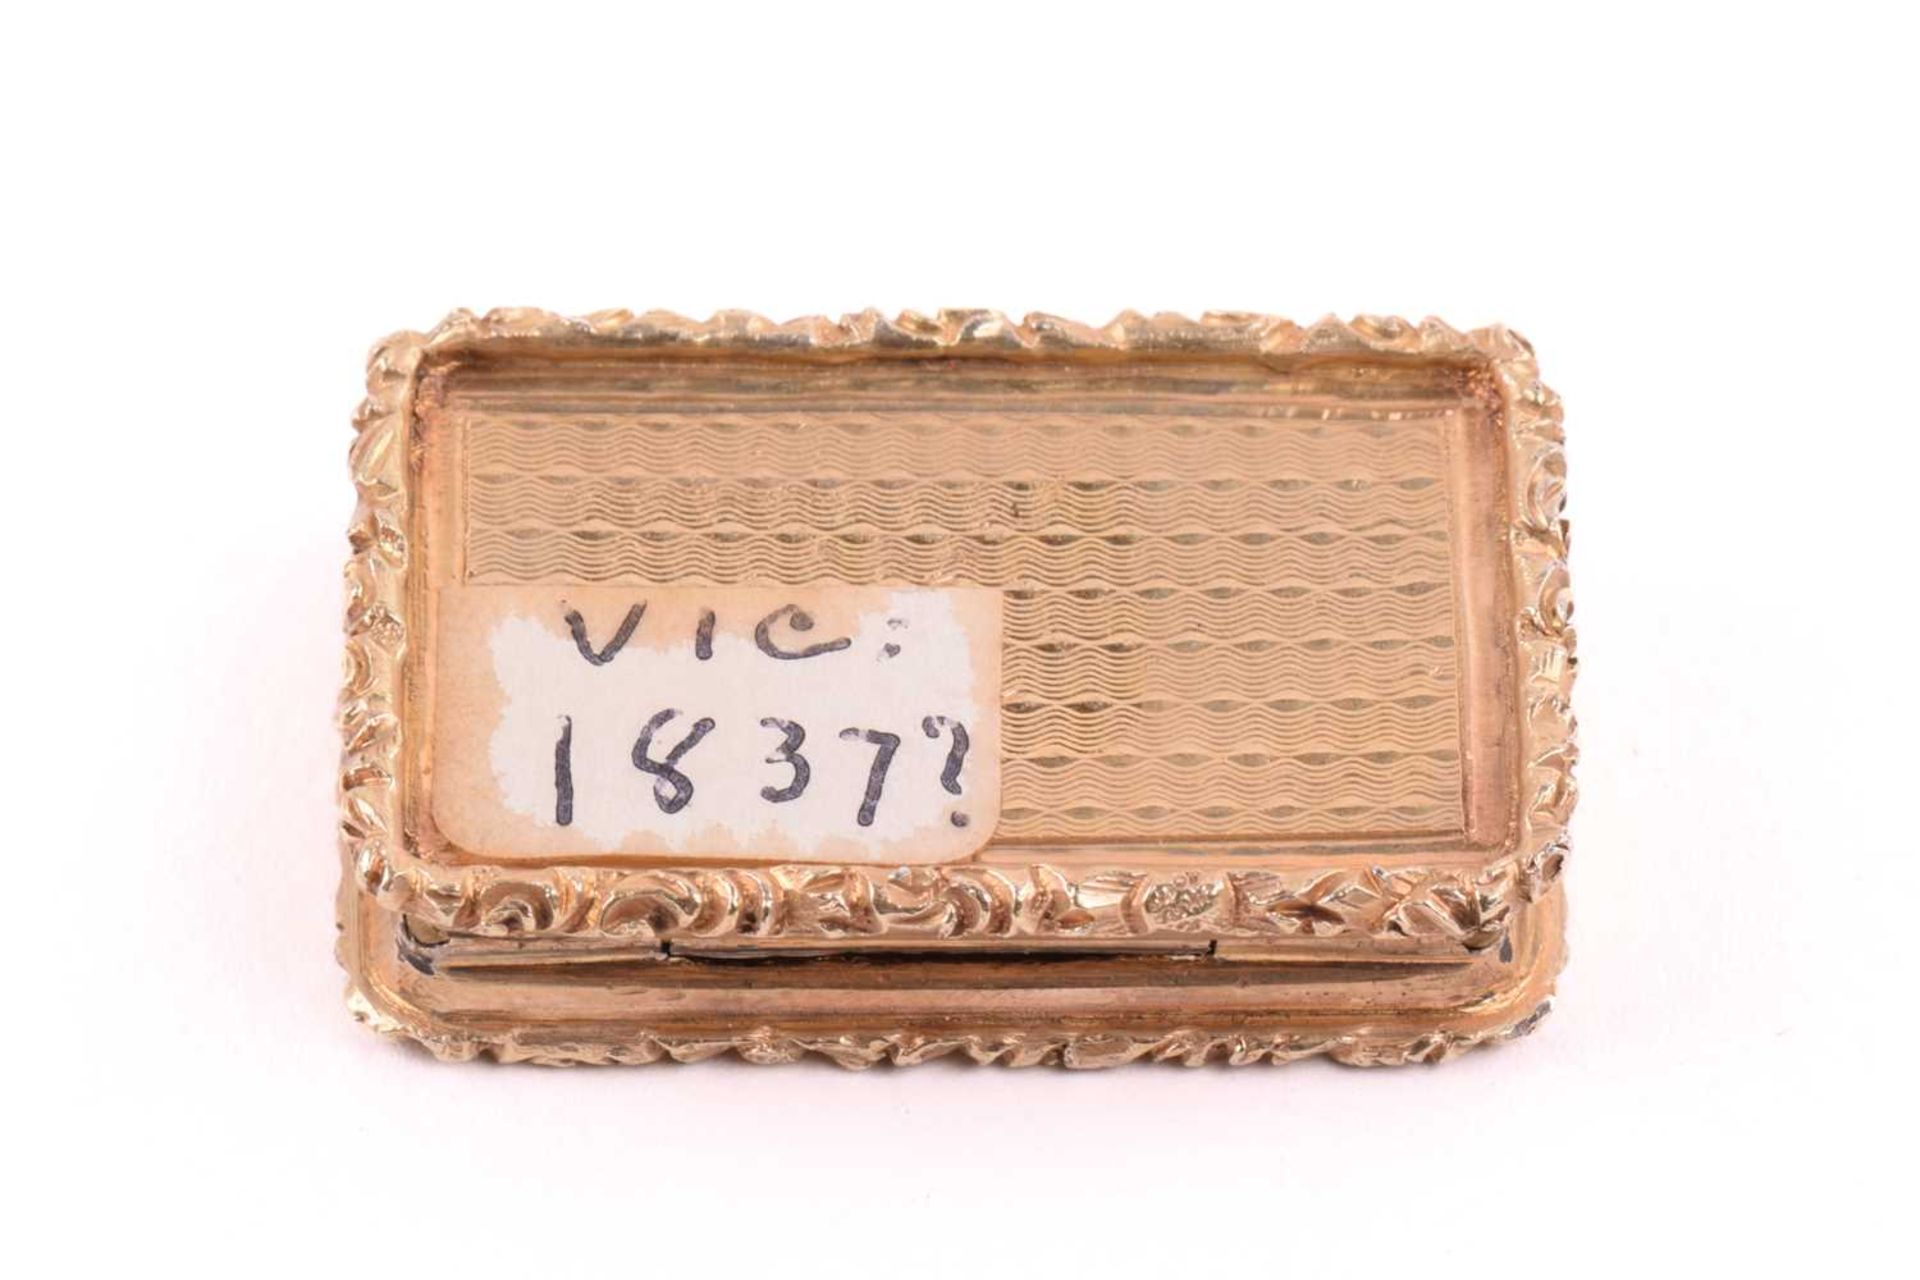 A Victorian silver-gilt vinaigrette, by Edward Smith, Birmingham, rubbed makers mark possibly - Image 6 of 7